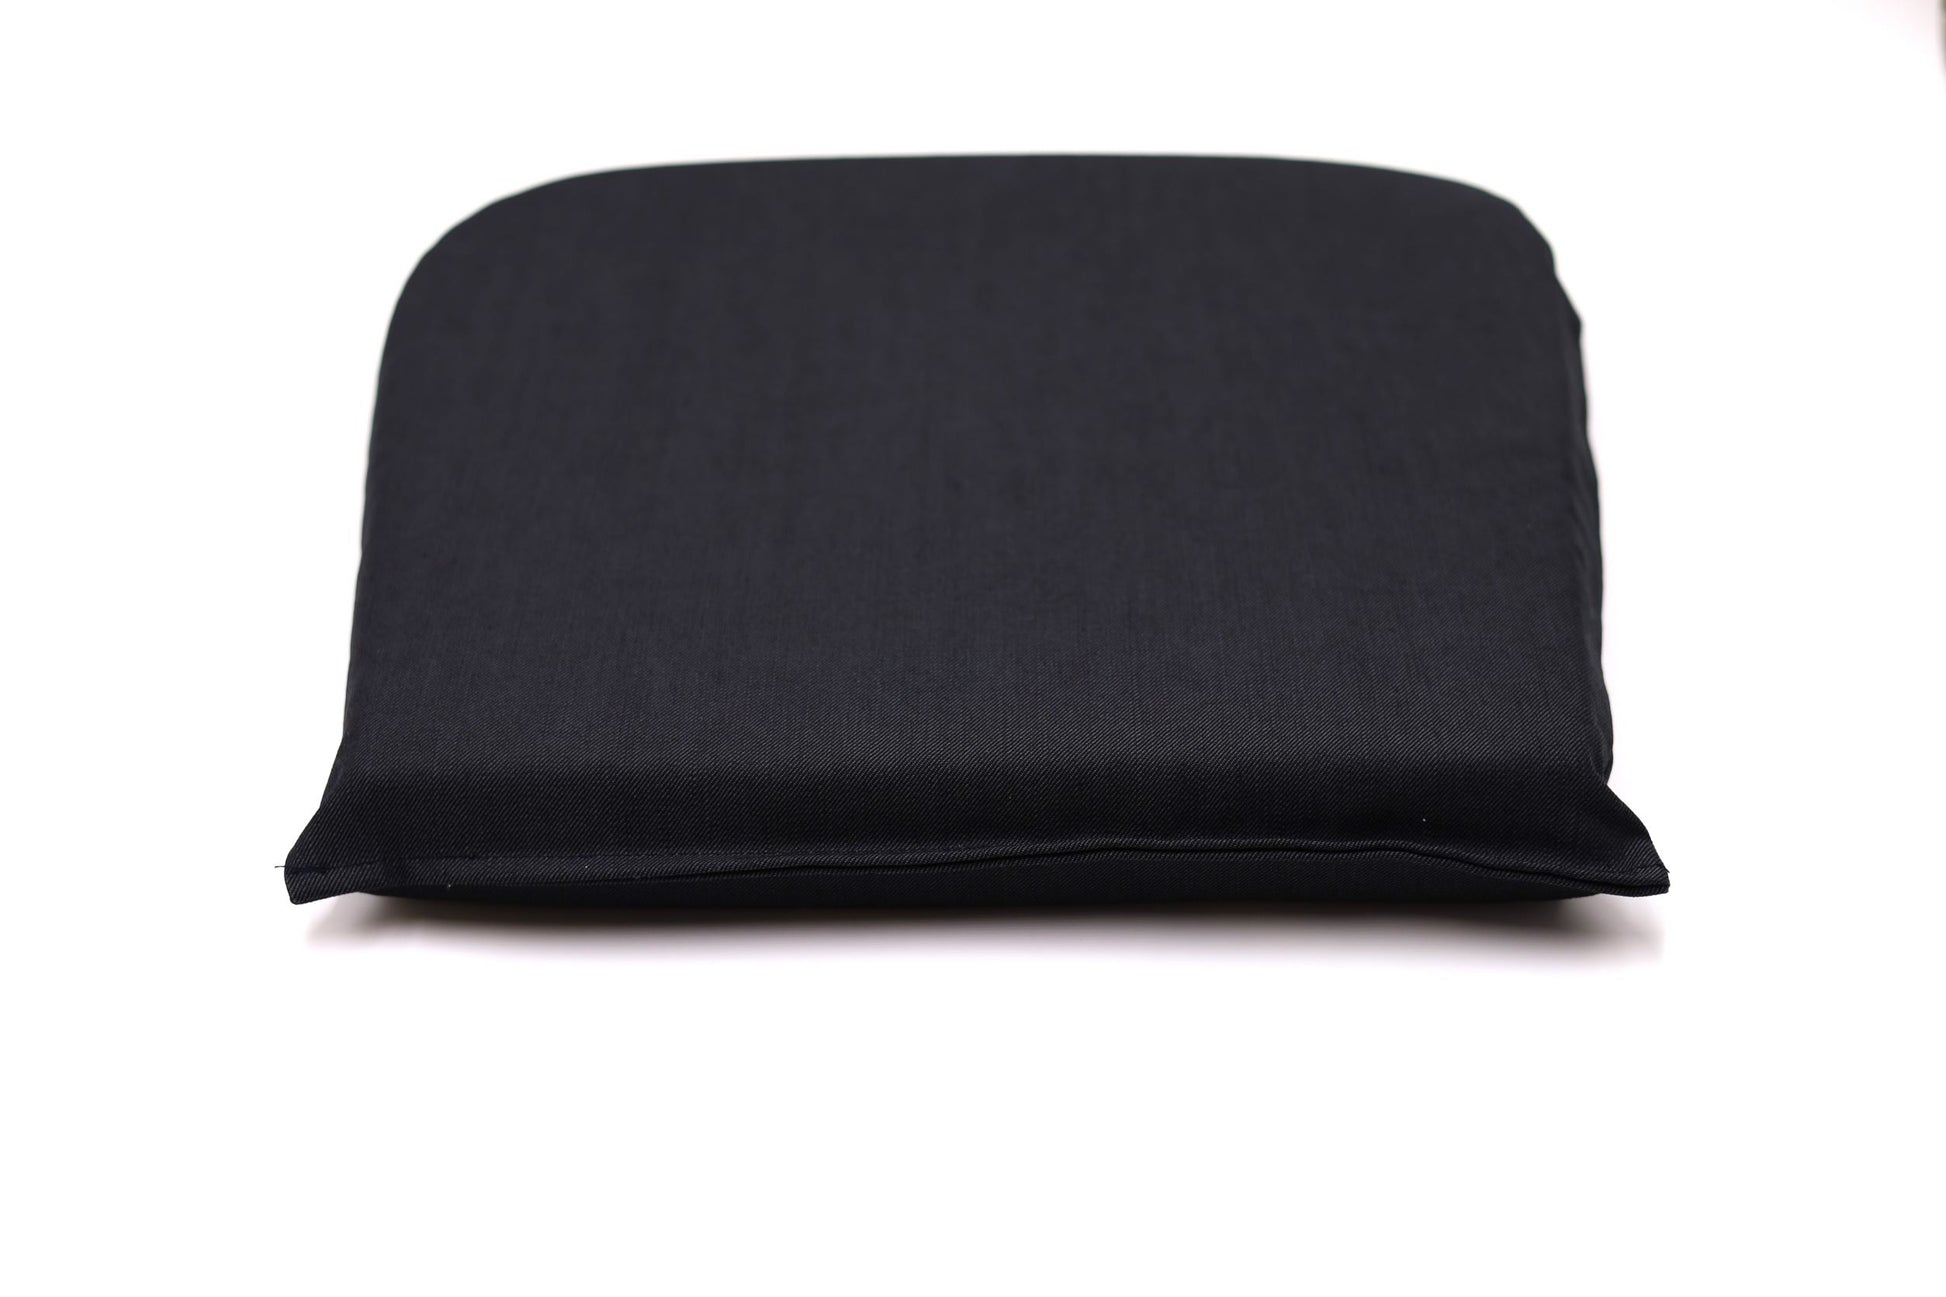 Extra Thick Seat Cushion with Memory Foam Maximum Support